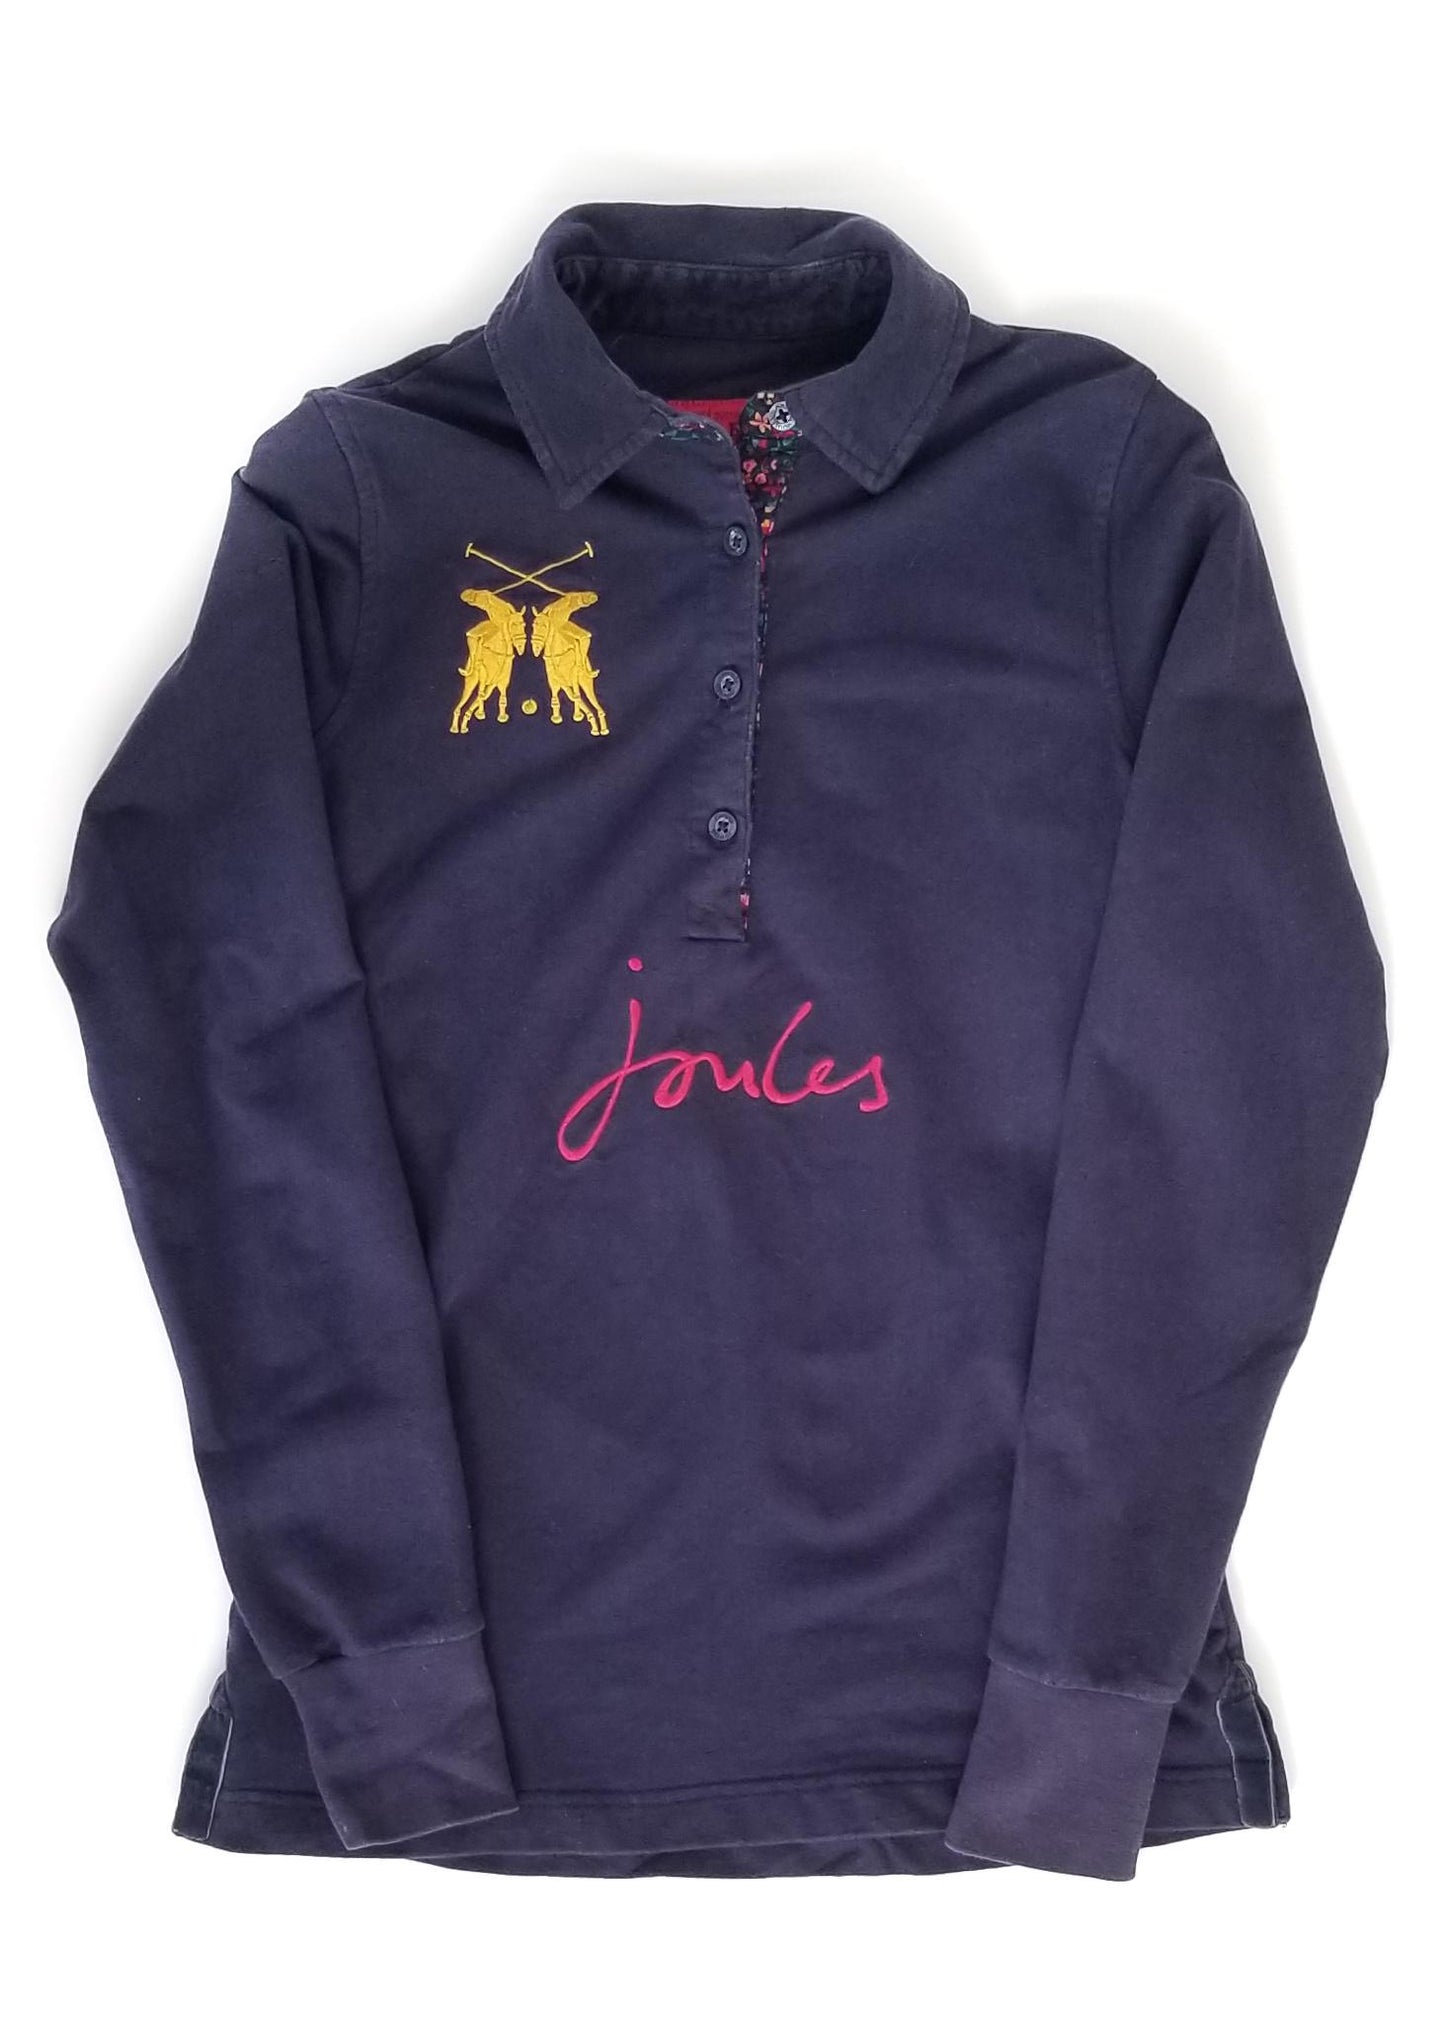 Joules Long Sleeve Polo - Navy - Women's Size 4